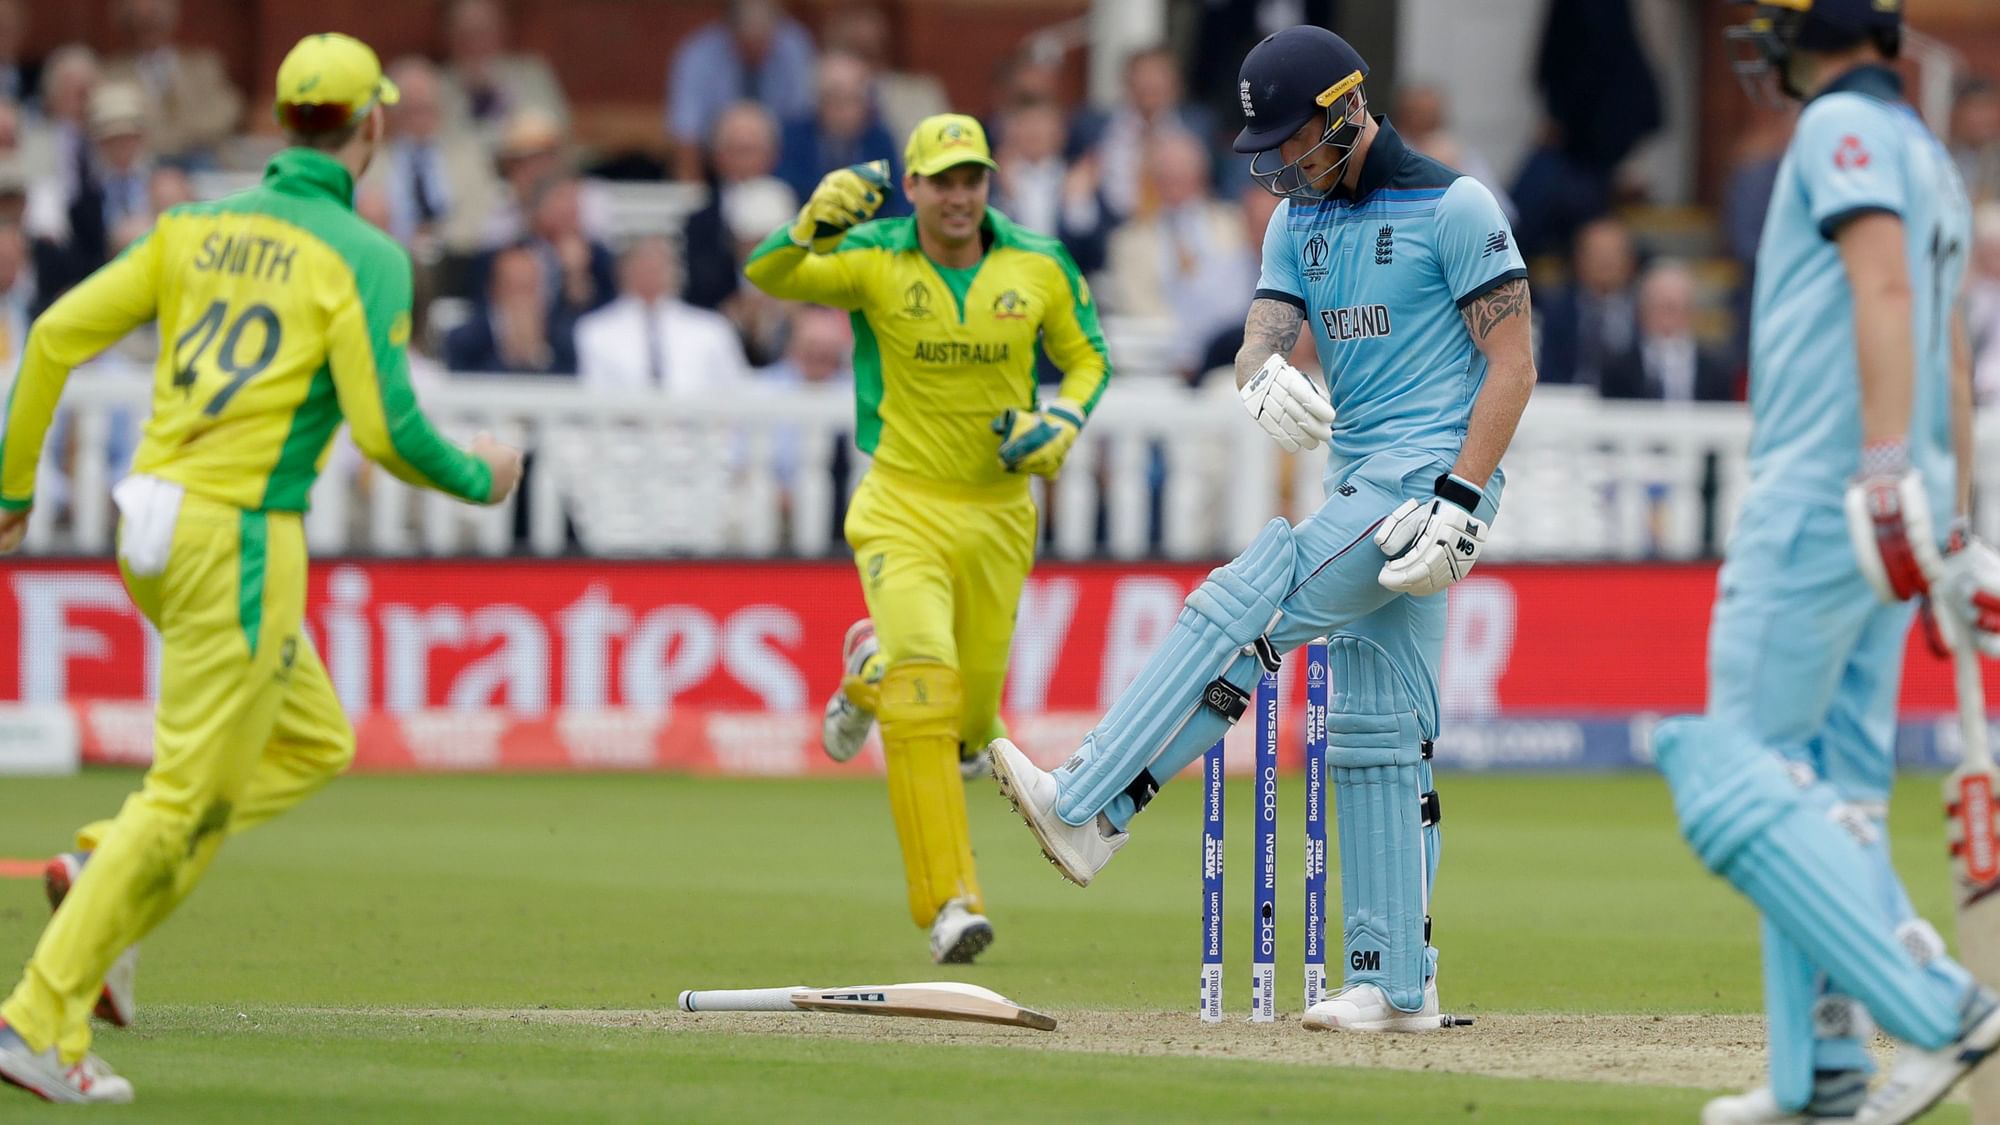 England’s Ben Stokes kicks his bat after being clean bowled by Australia’s Mitchell Starc, as Australia’s Steve Smith looks on during the Cricket World Cup match between England and Australia at Lord’s.&nbsp;